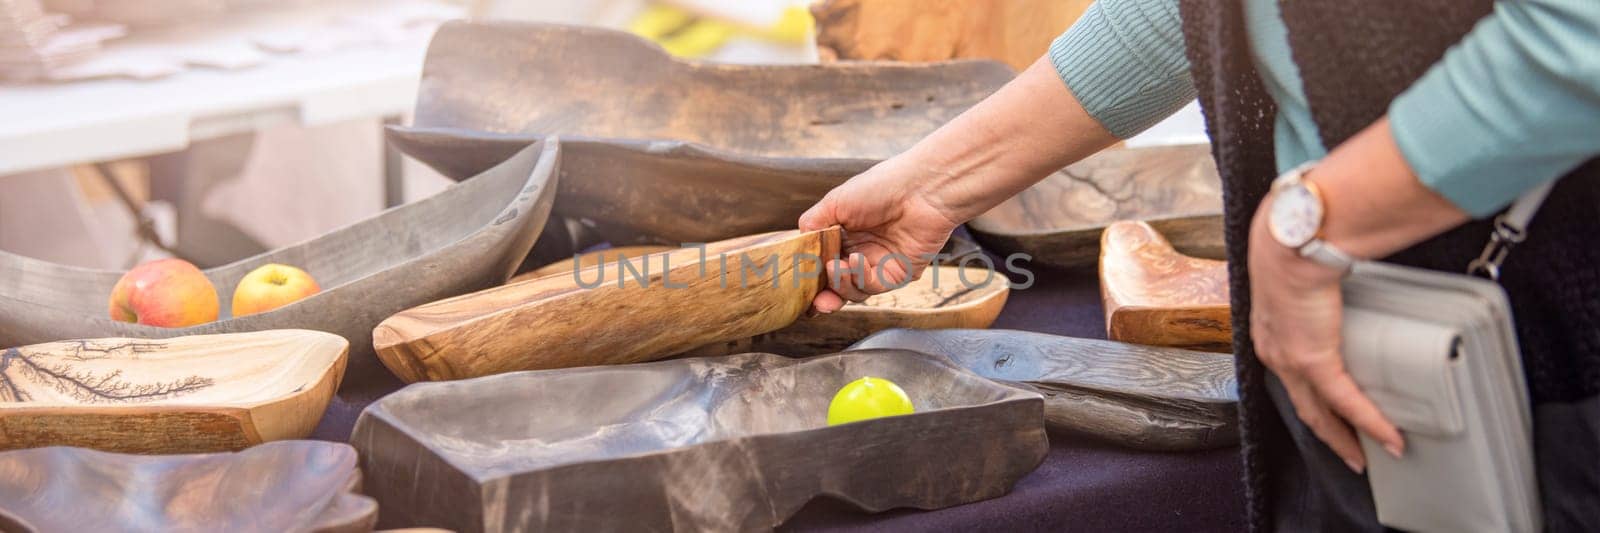 Wooden plate. Large plates and trays are made of exotic woods in different colors, the buyer chooses wooden utensils in the market, the concept of craft and small business. High quality photo